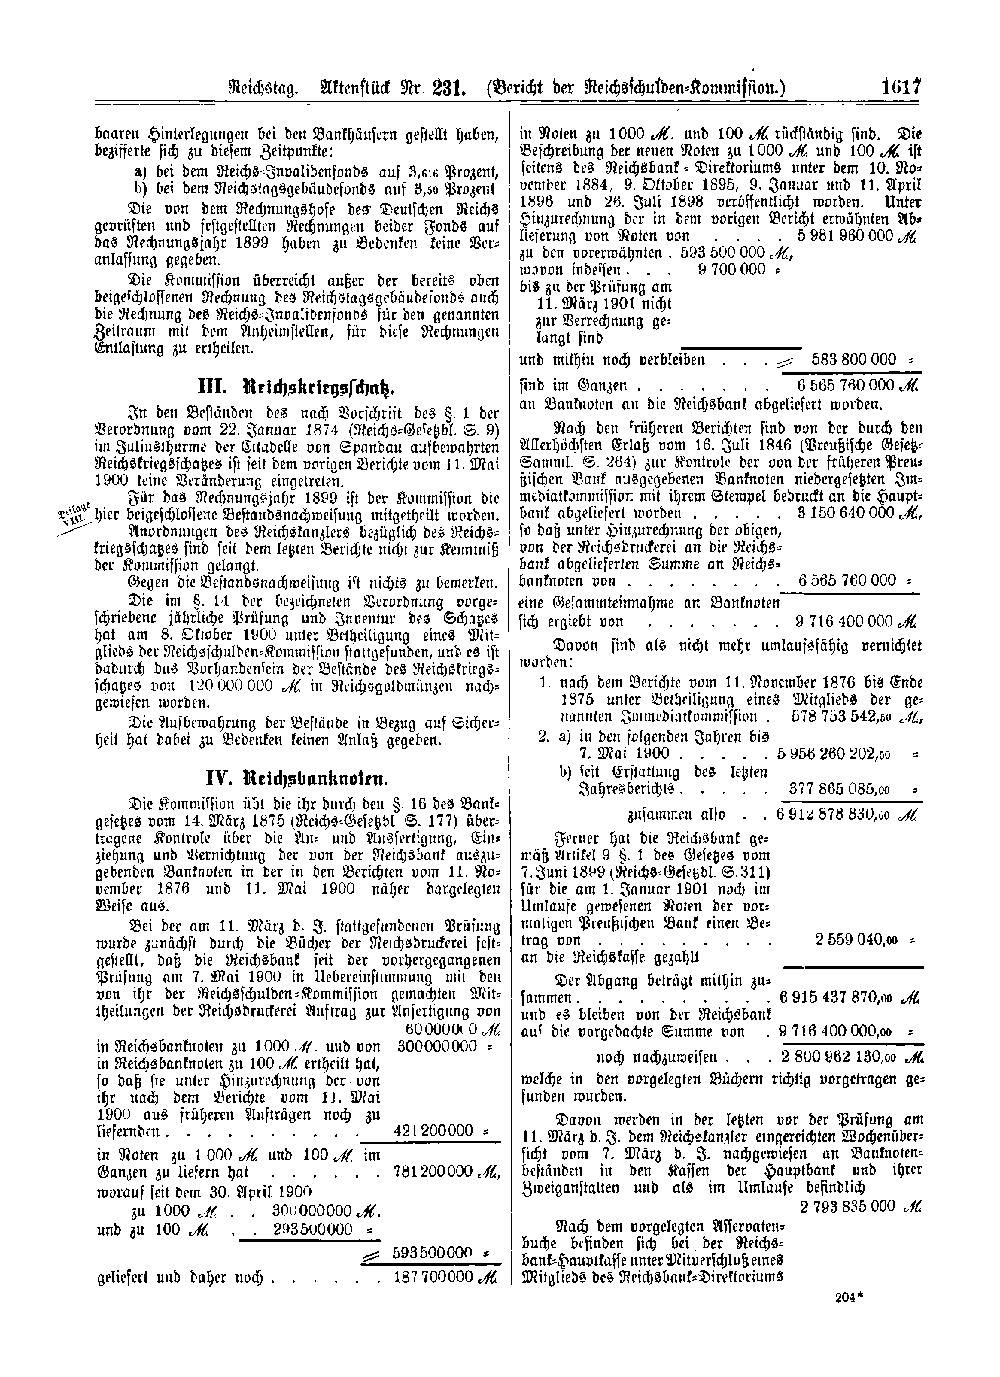 Scan of page 1617